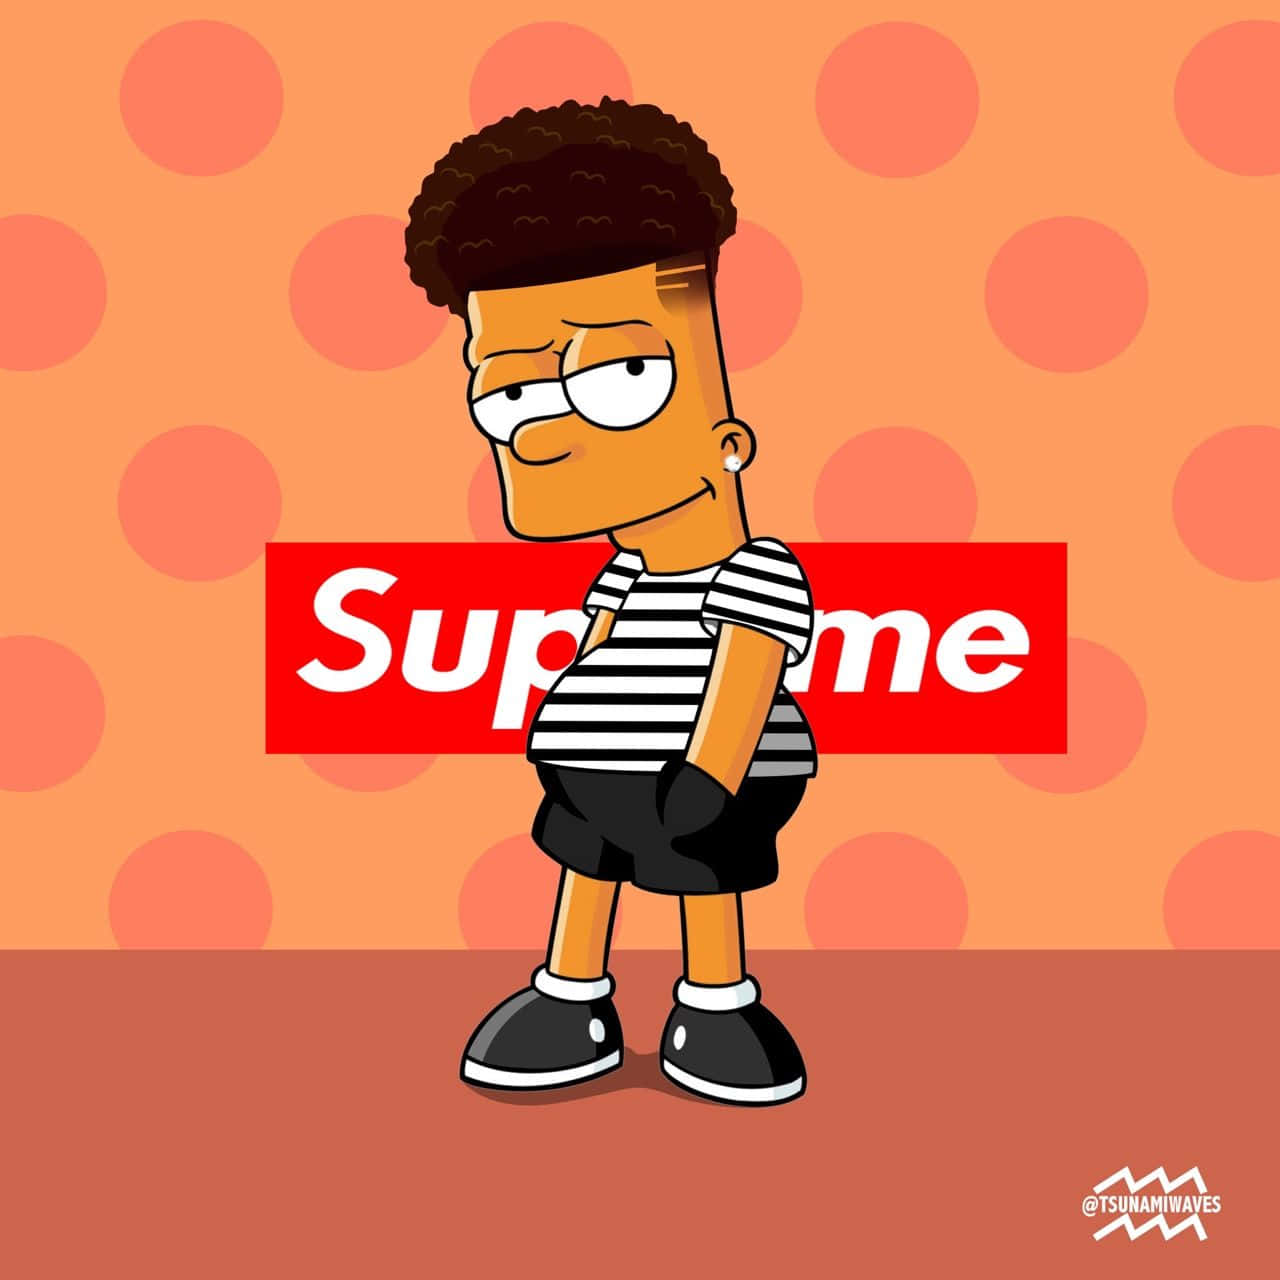 HD wallpaper: The Simpsons Bart Simpson, Products, Supreme, Supreme (Brand)